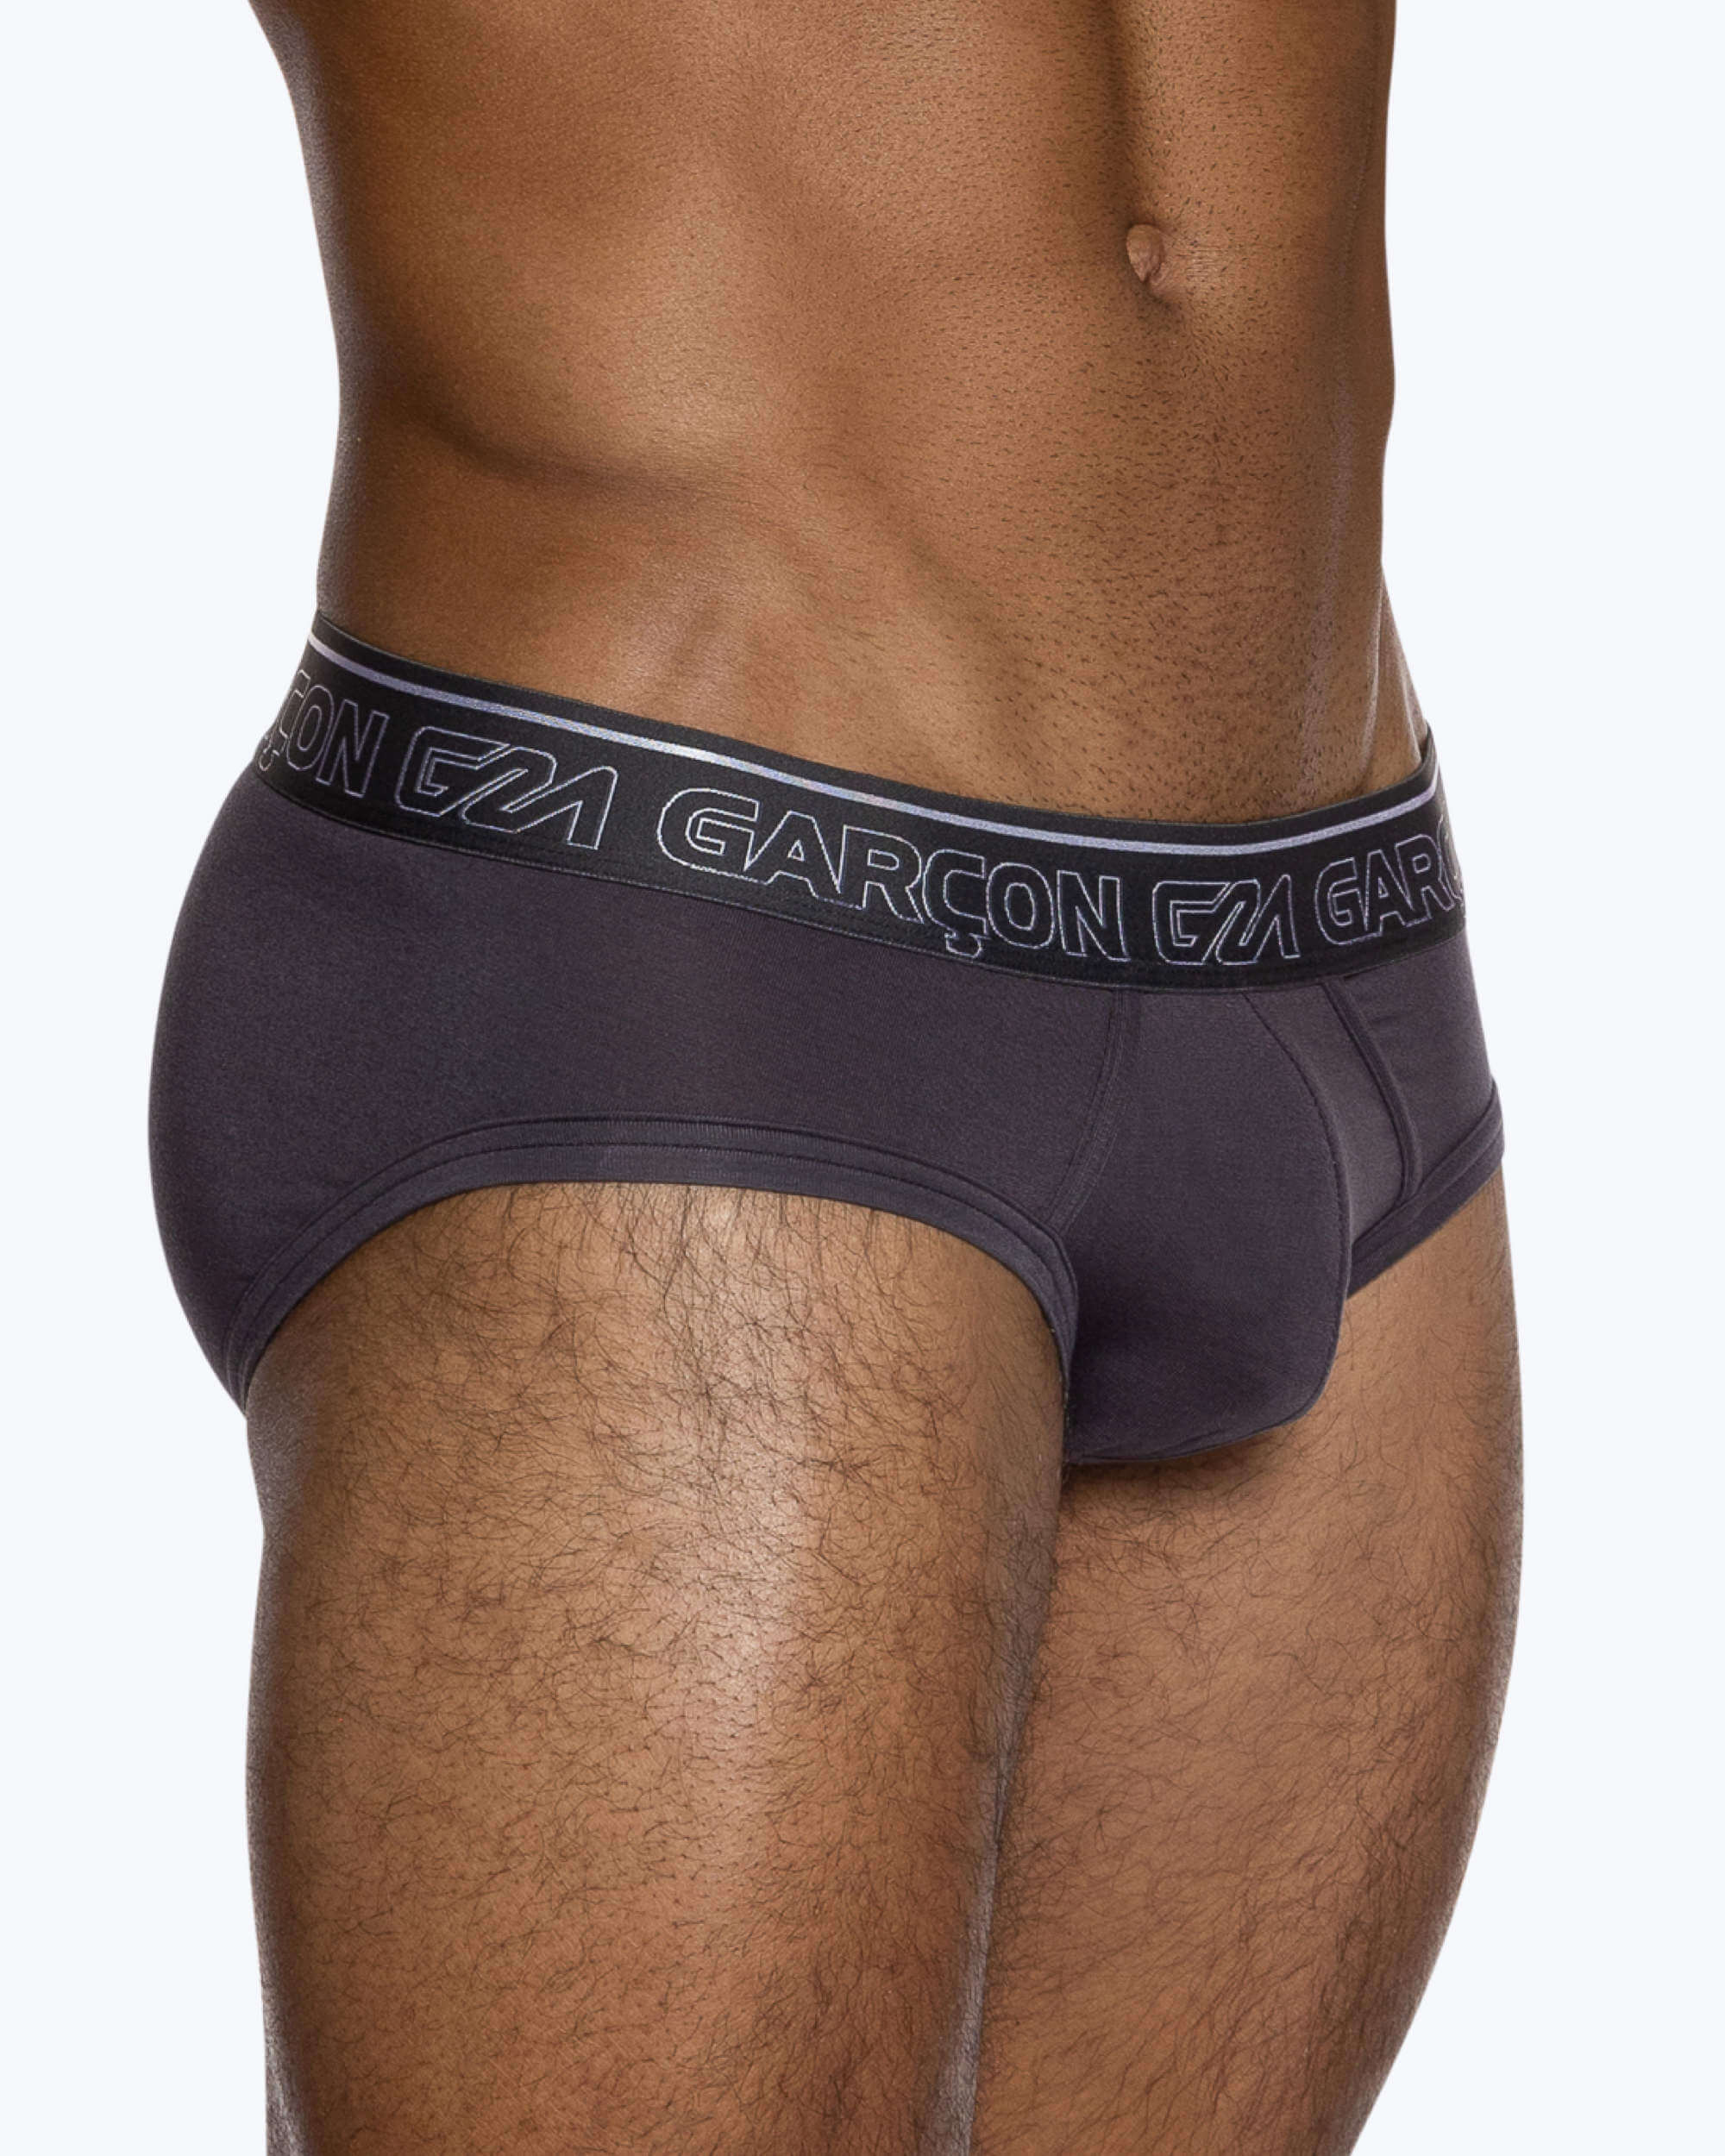 GAY underwear different models and colors boxer briefs tops - Germany, New  - The wholesale platform